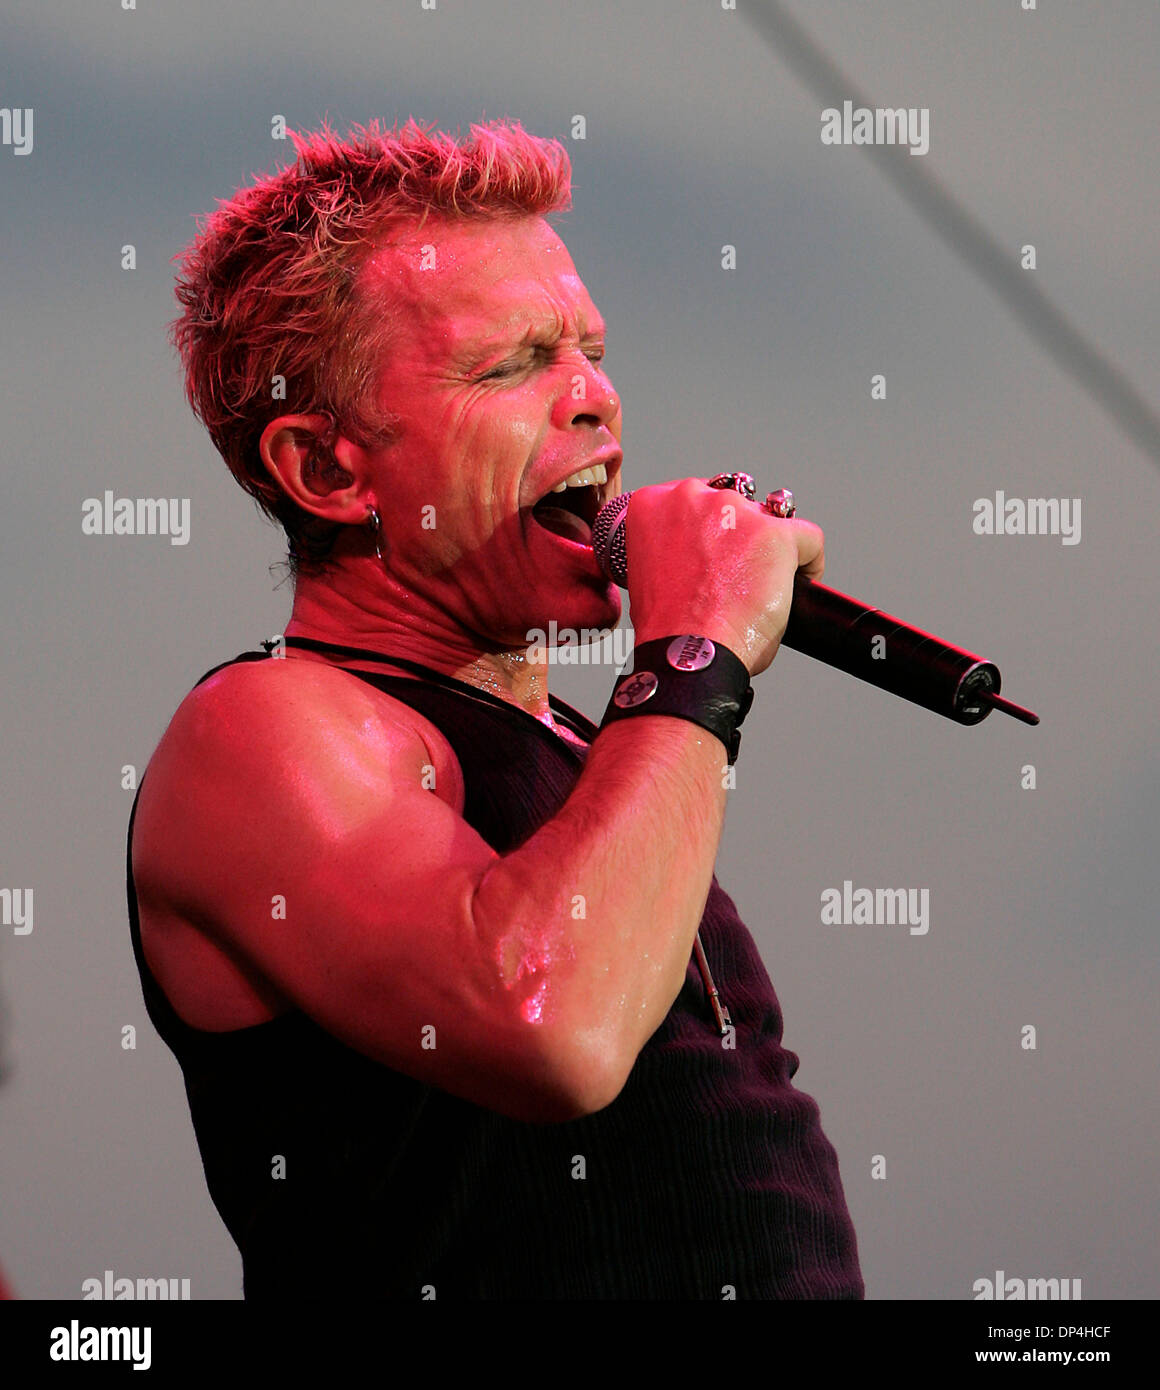 Aug 12, 2006; Los Angeles, CA, USA; BILLY IDOL performing to thousands of his loyal fans at the Del Mar Racetrack in San Diego, CA. Mandatory Credit: Photo by John Hardick/ZUMA Press. (©) Copyright 2006 by John Hardick Stock Photo